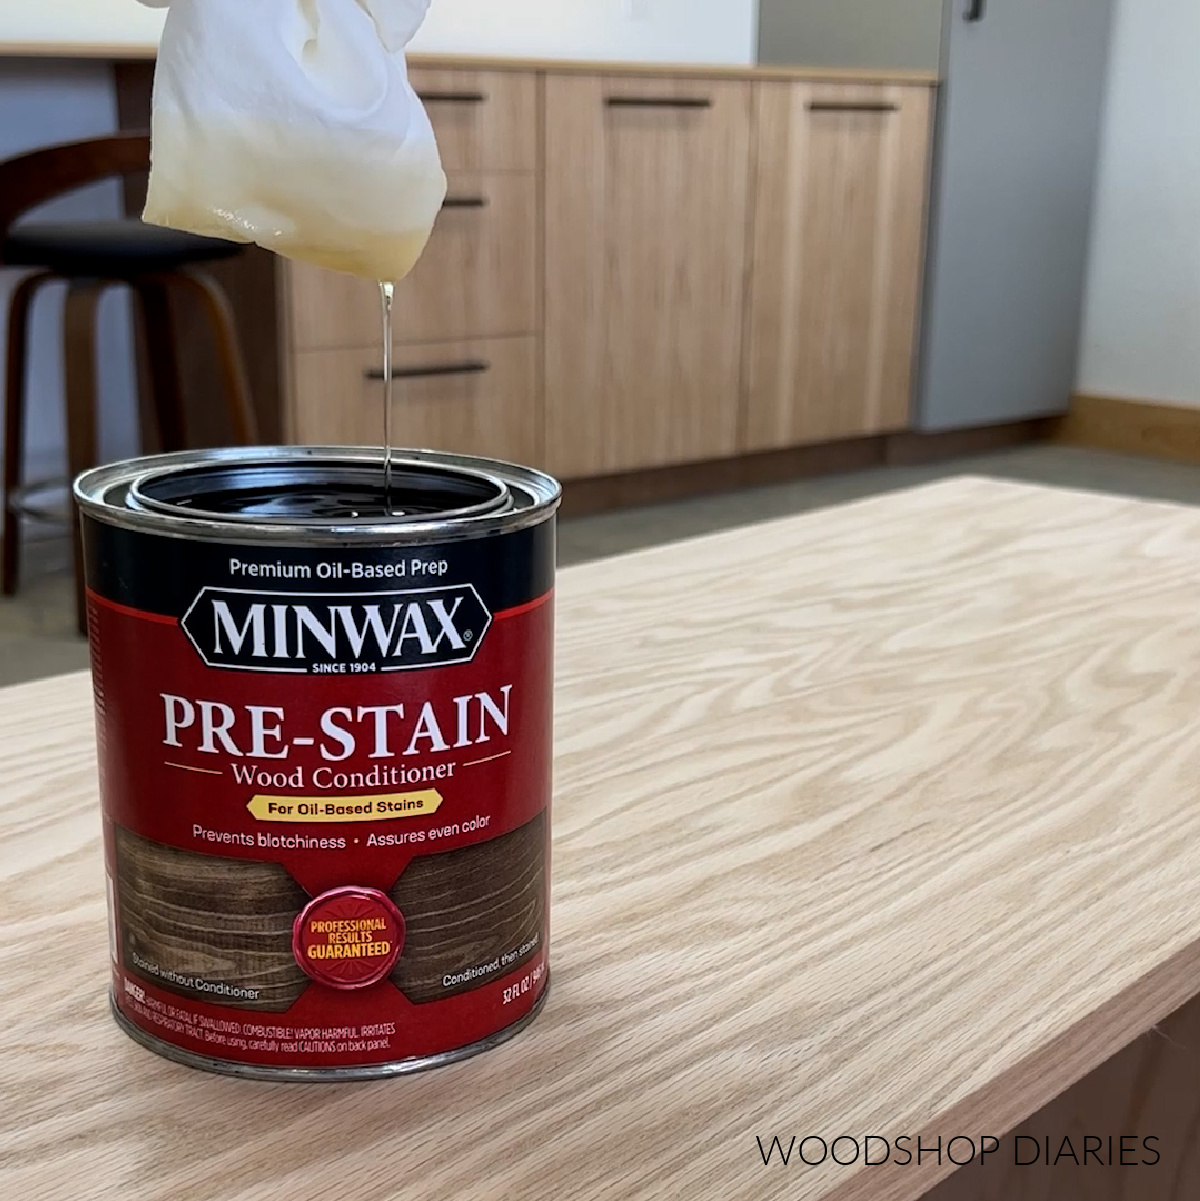 rag dipped in Minwax prestain dripping into can